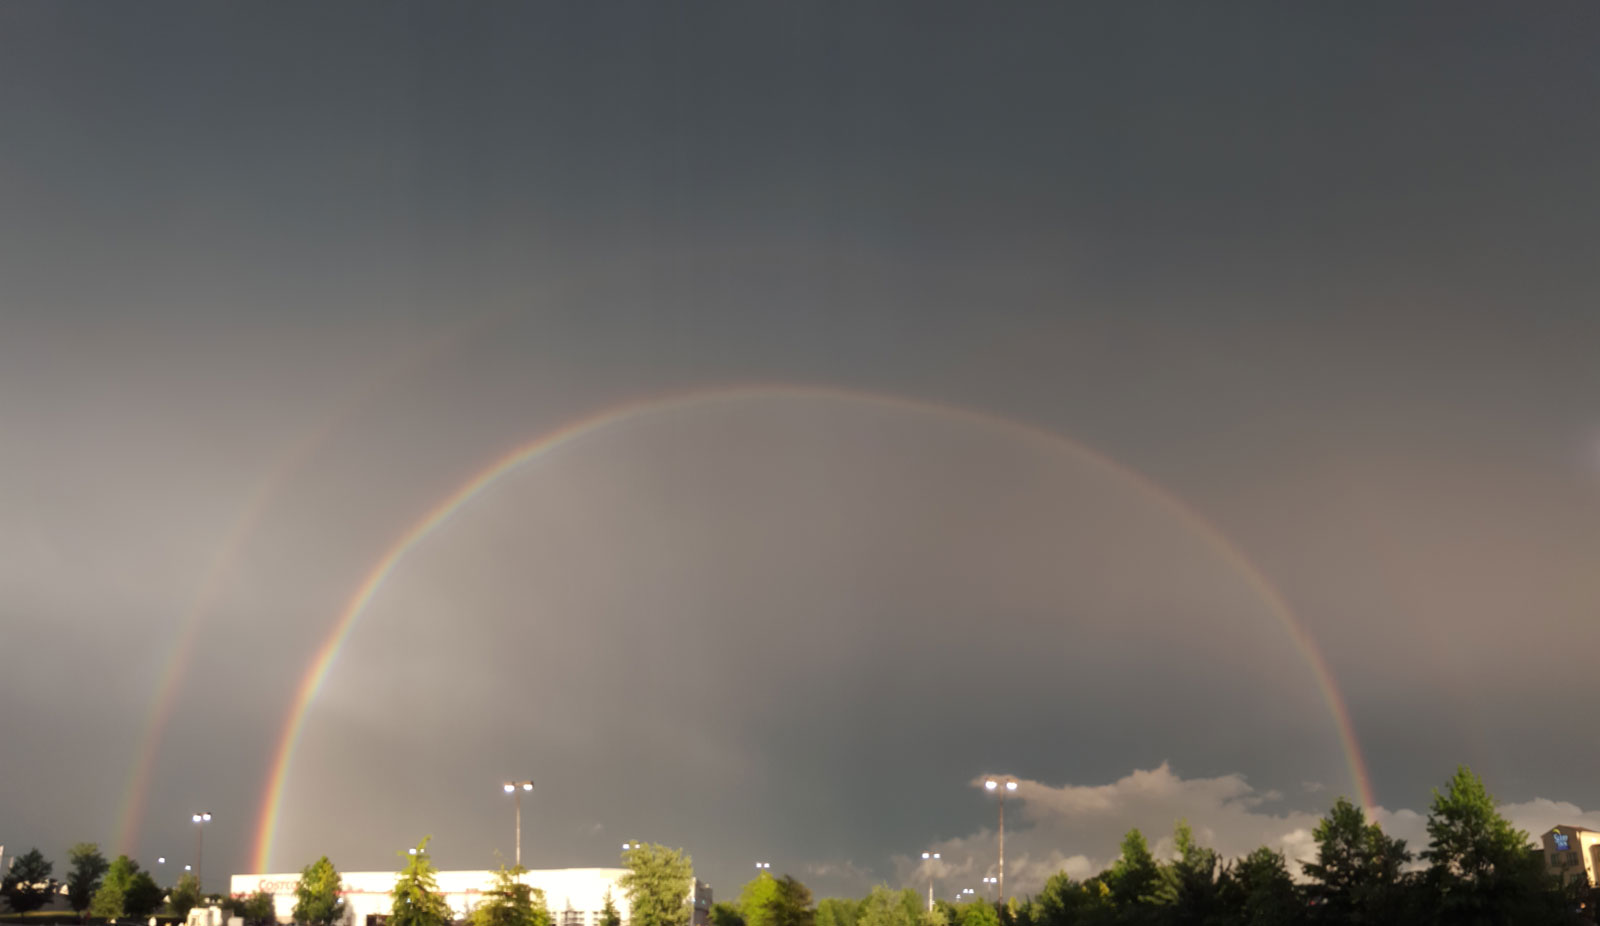 A double rainbow appears in Winchester, Virginia on June 16, 2016 after storms rolled through the region. (Courtesy Joel Griggs)